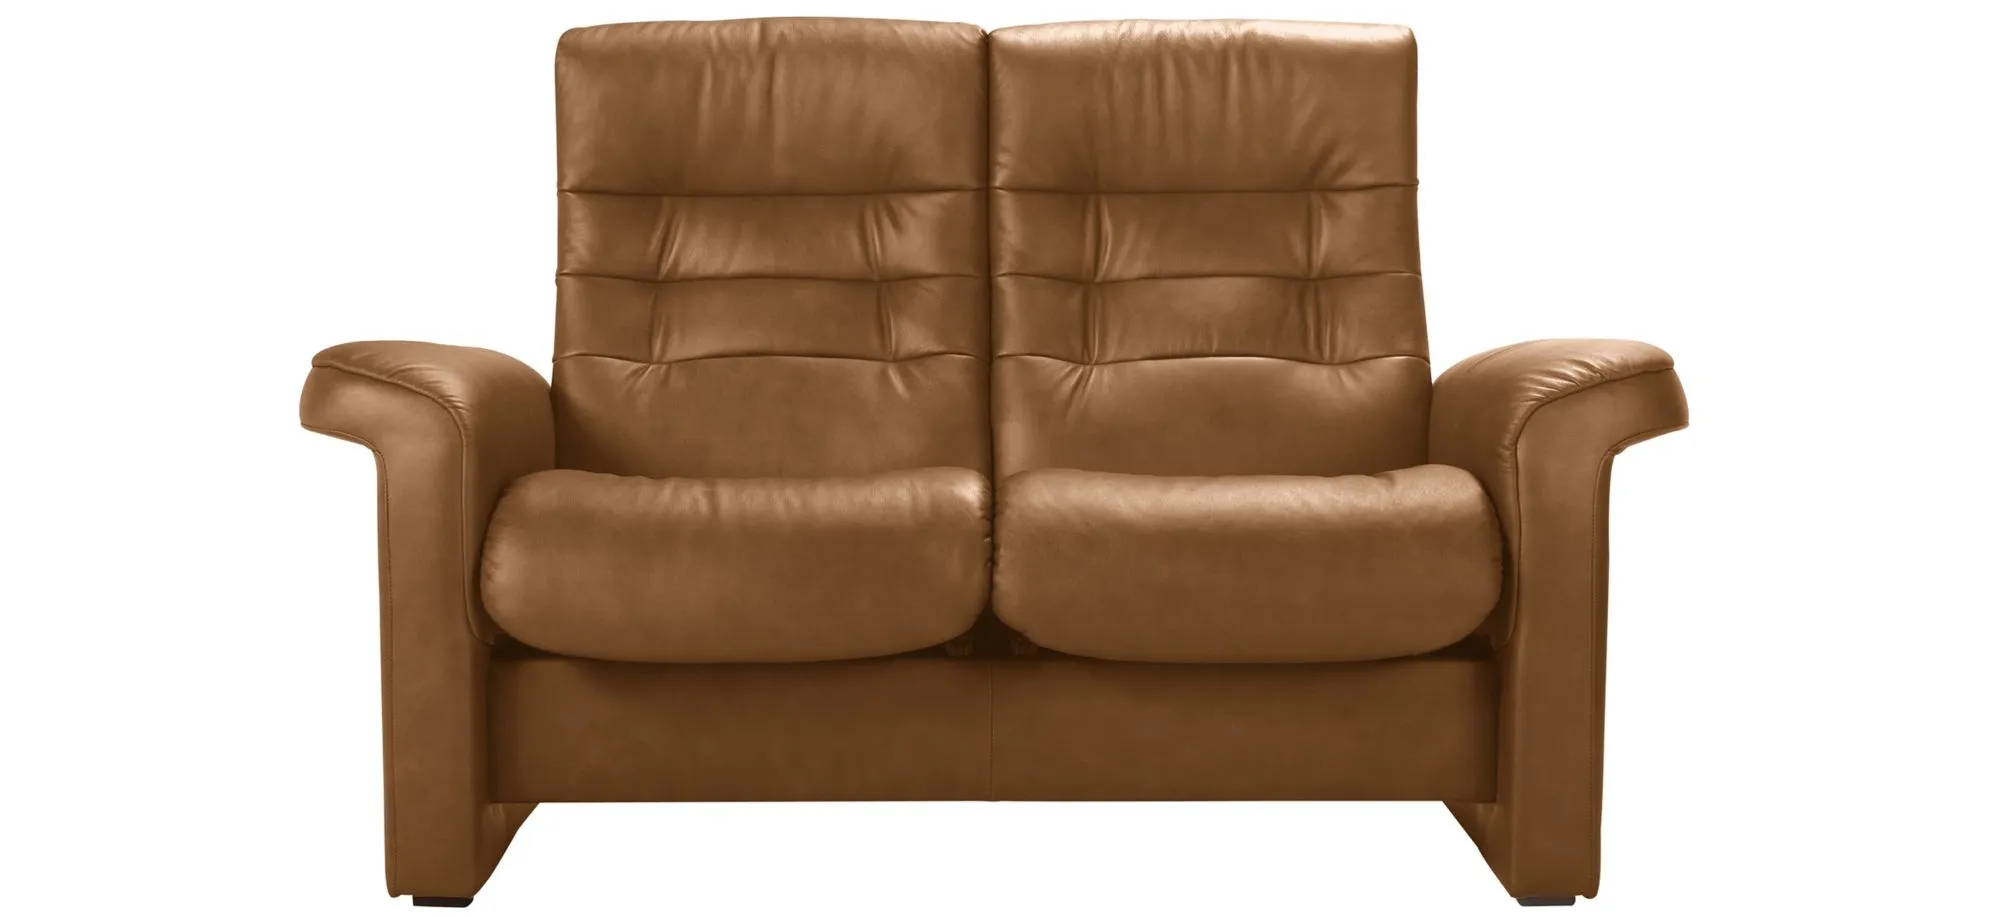 Stressless Sapphire Leather Reclining Loveseat in Paloma Taupe by Stressless